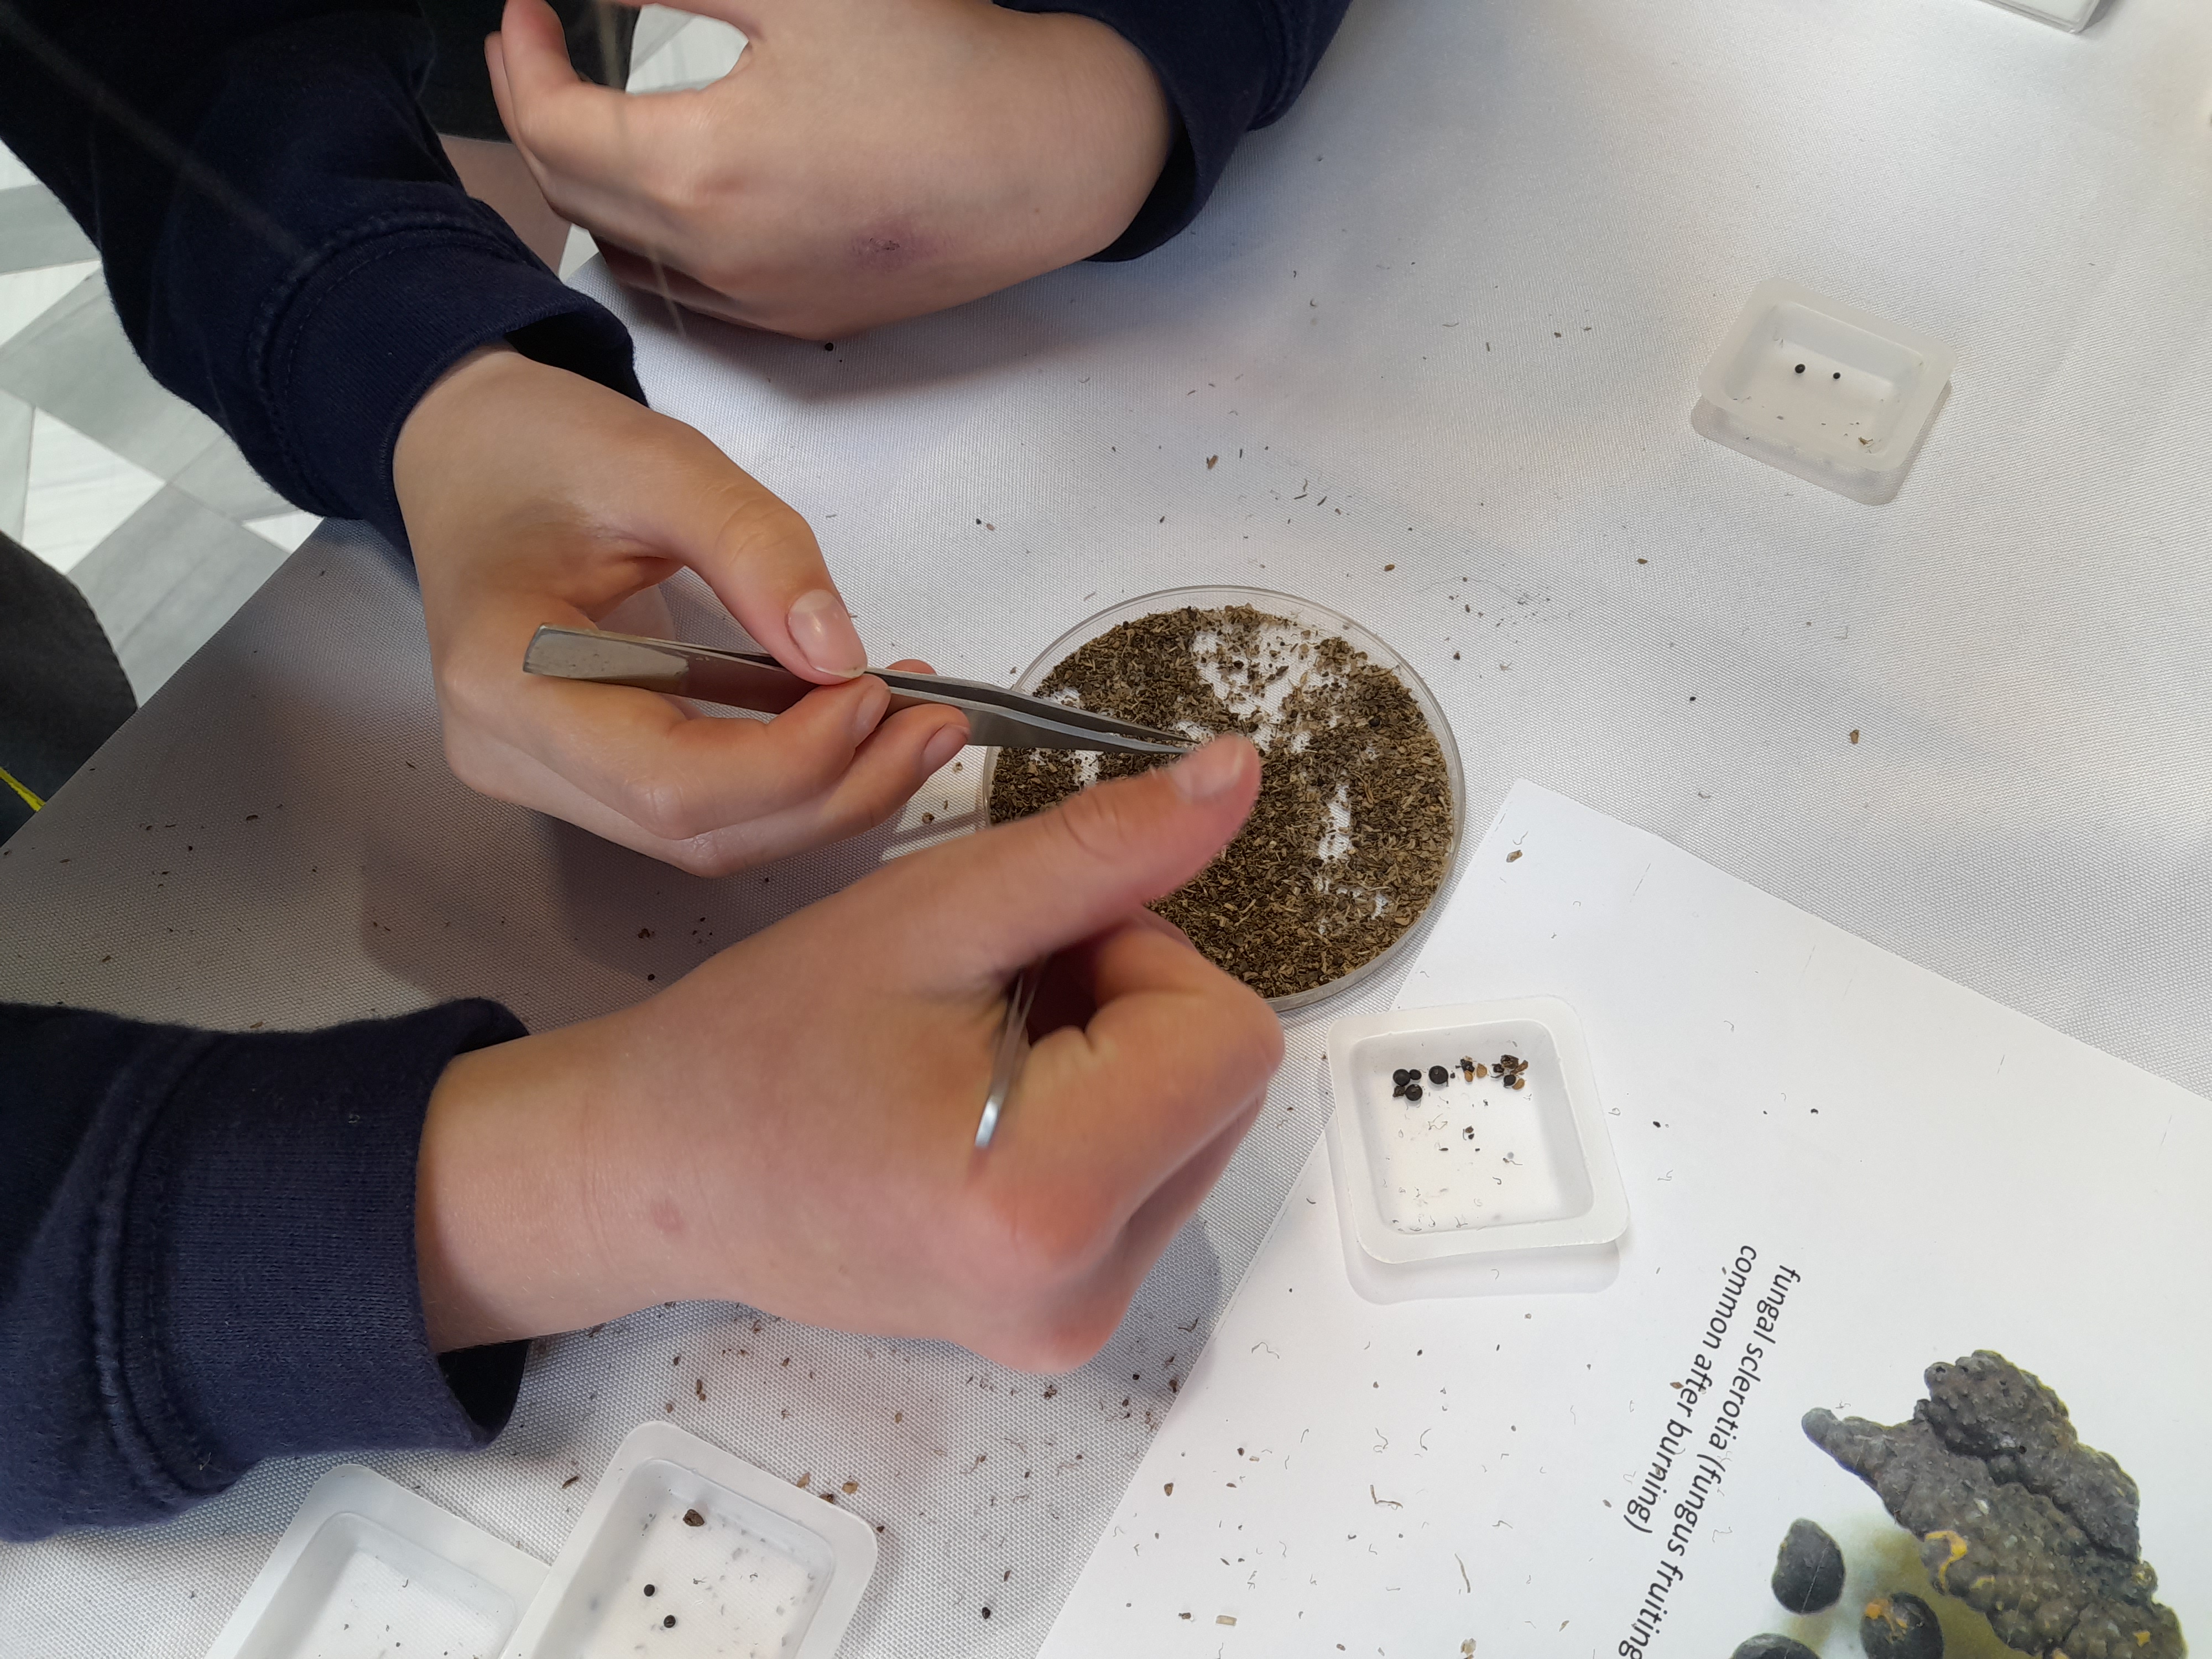 Students use tweezers to find tiny seeds in the environmental sample.